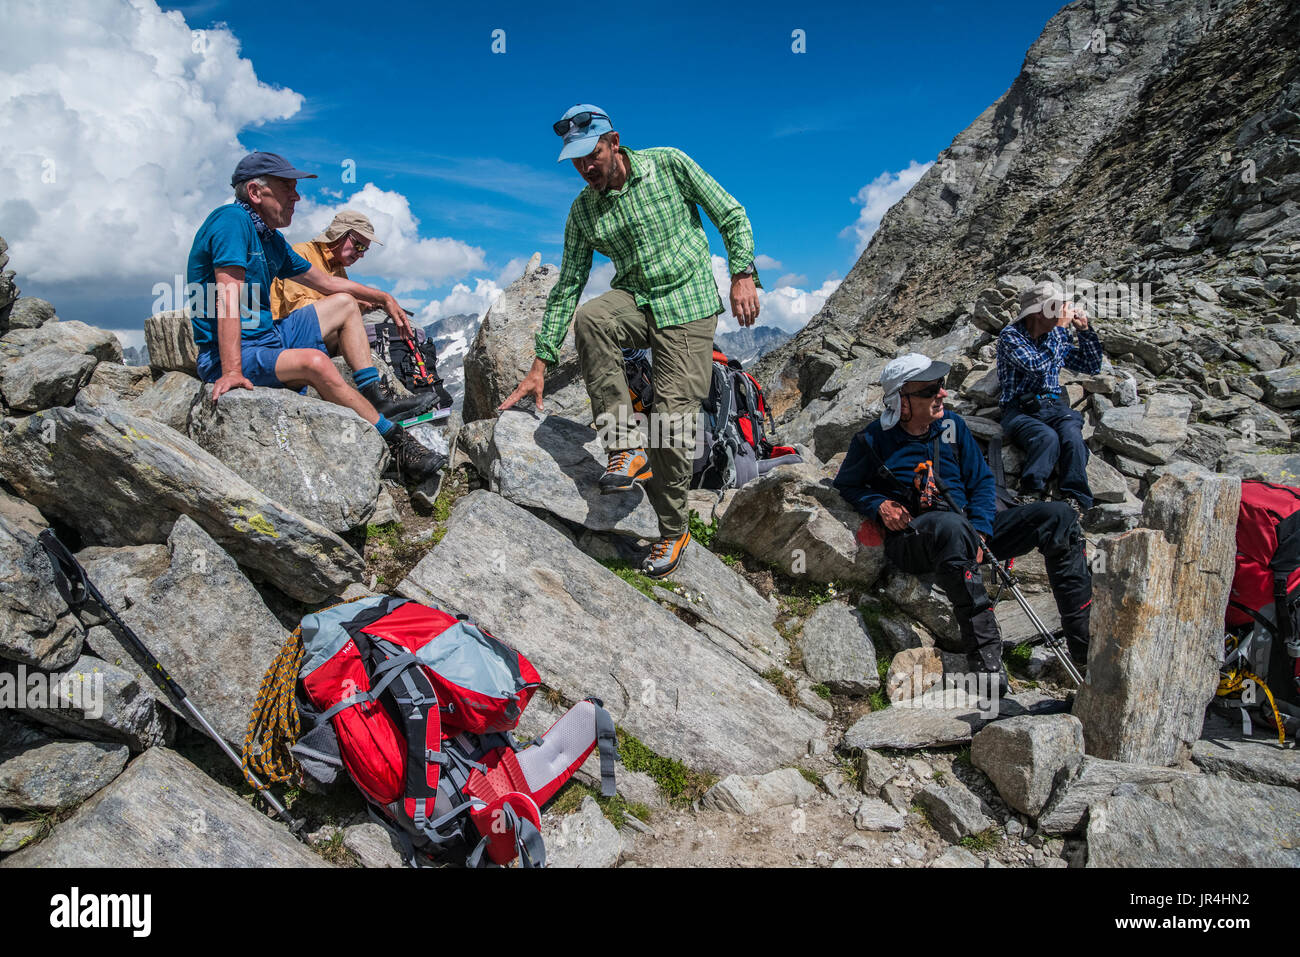 Trekking in the Zillertal seen here with mountaineers near the Greizer Hut mountain refuge Stock Photo